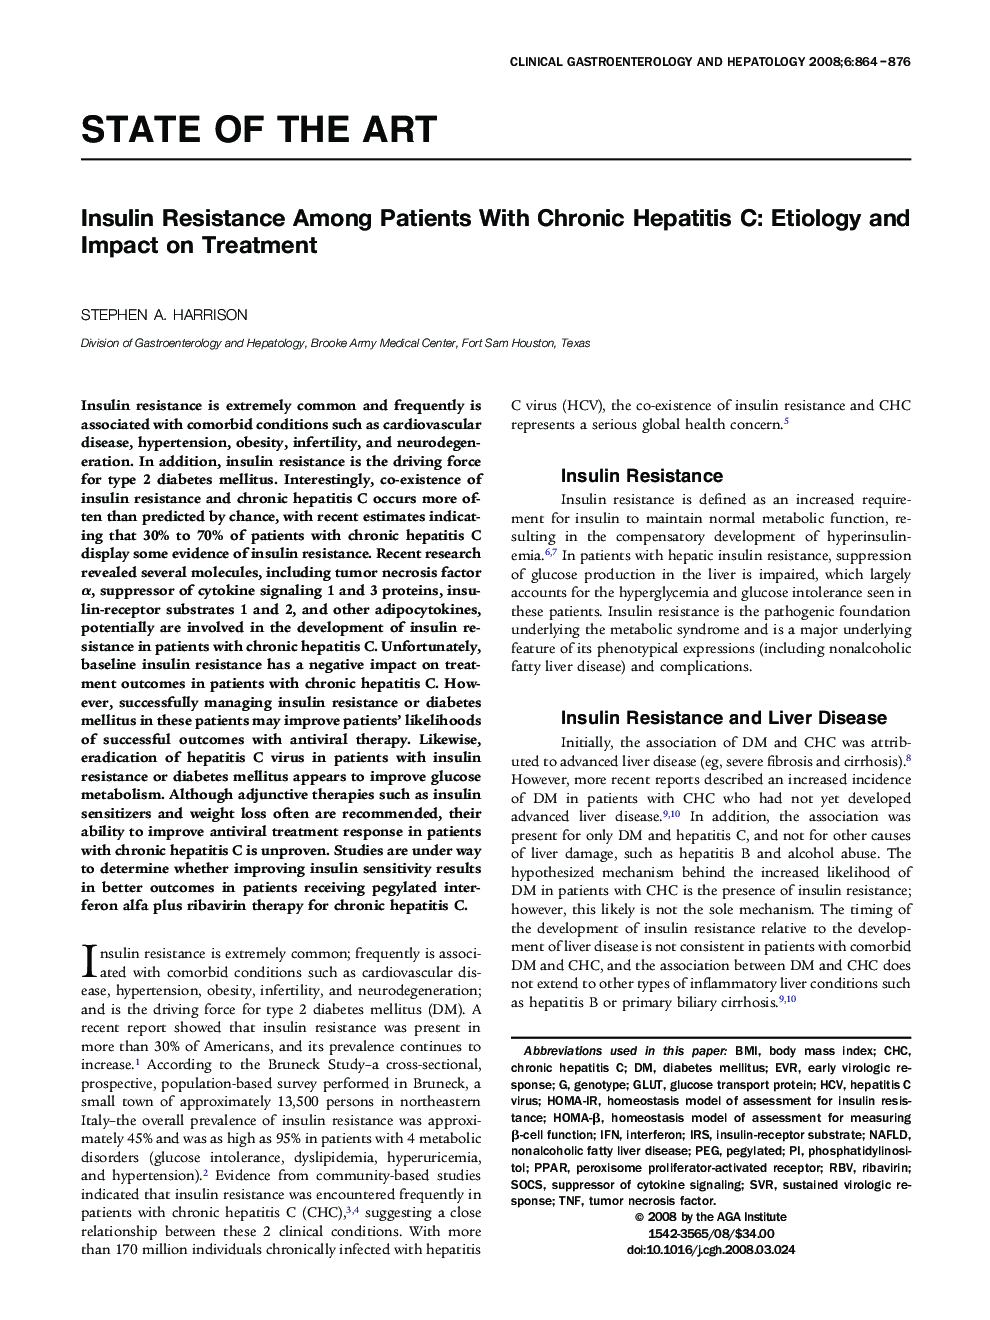 Insulin Resistance Among Patients With Chronic Hepatitis C: Etiology and Impact on Treatment